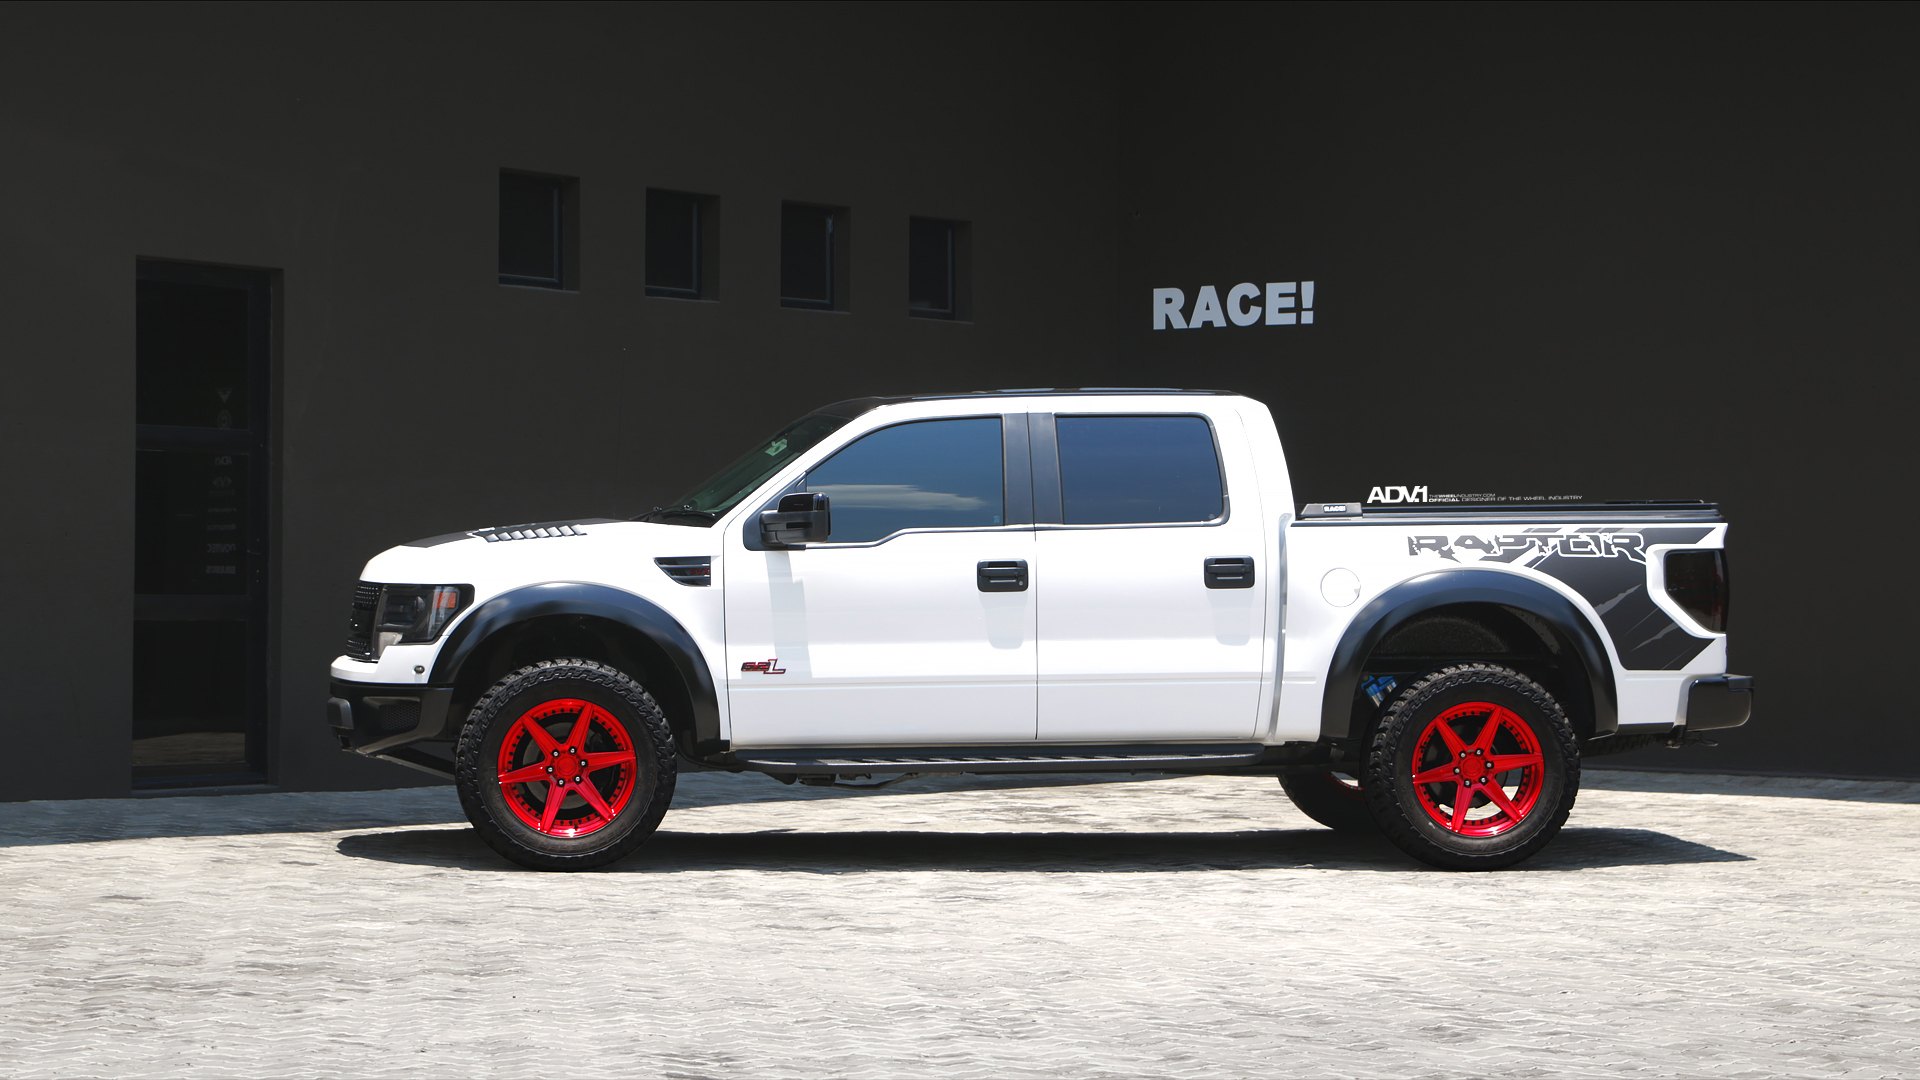 Ford Raptor 6.2L in White With Original Graphics - Photo by ADV.1